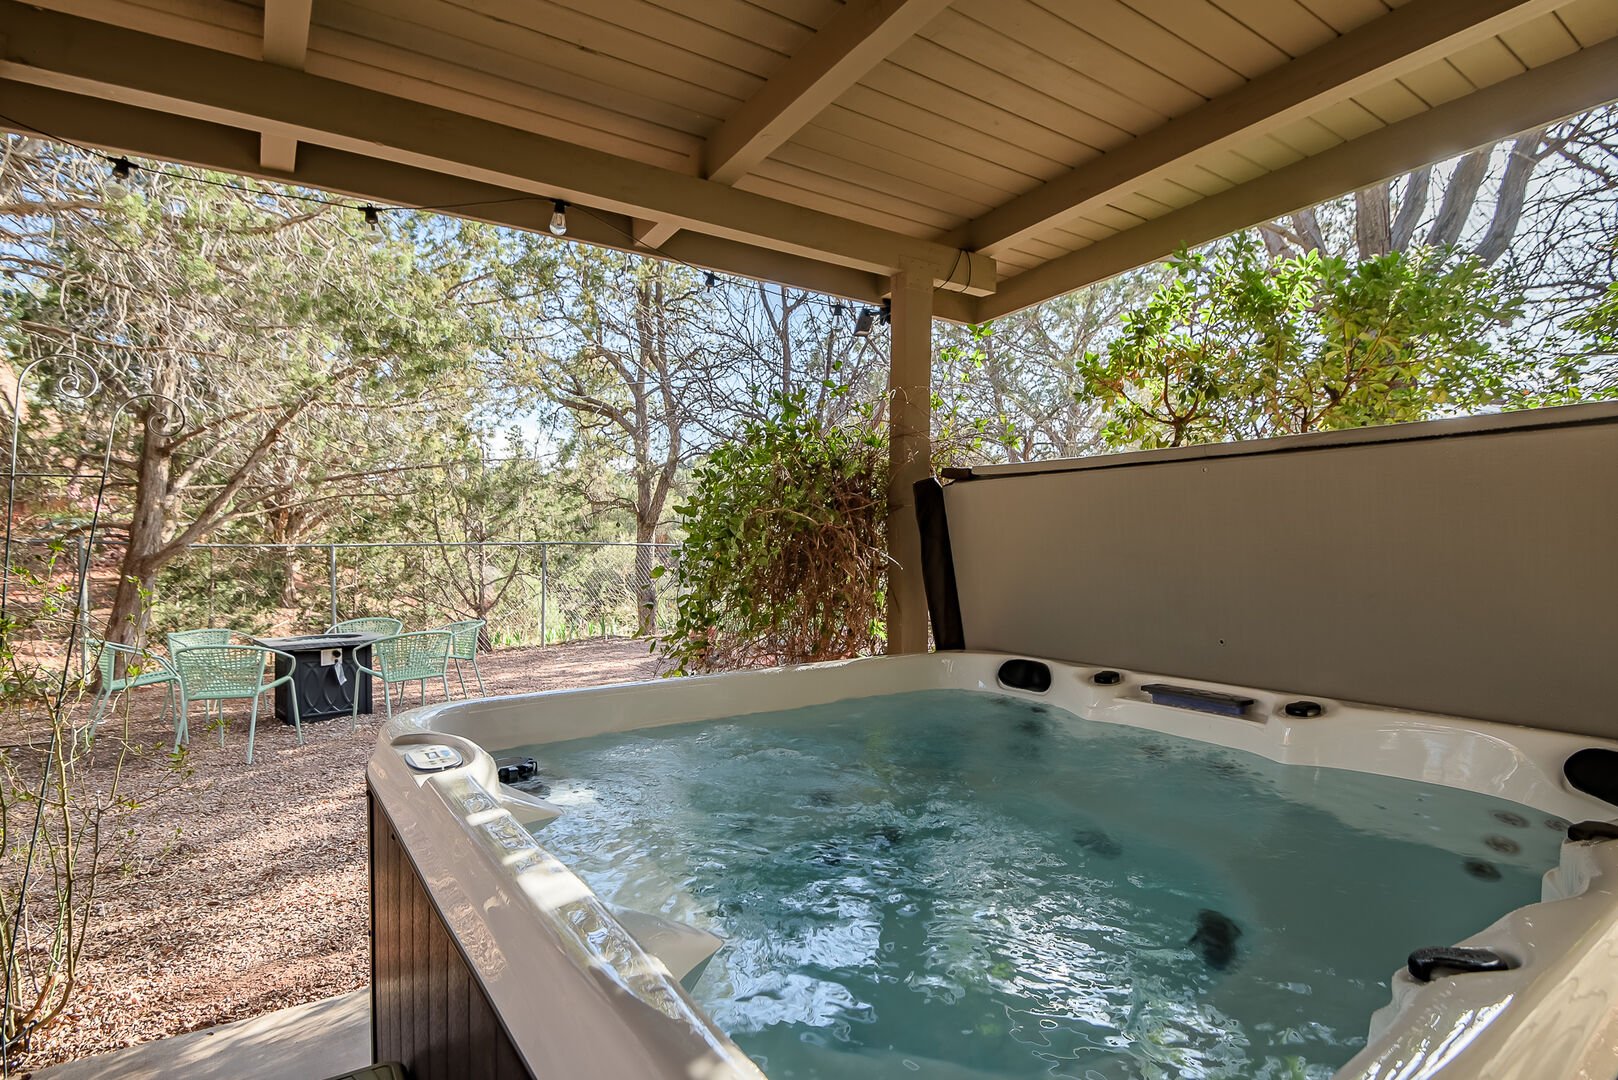 Relax in the Private Hot Tub!